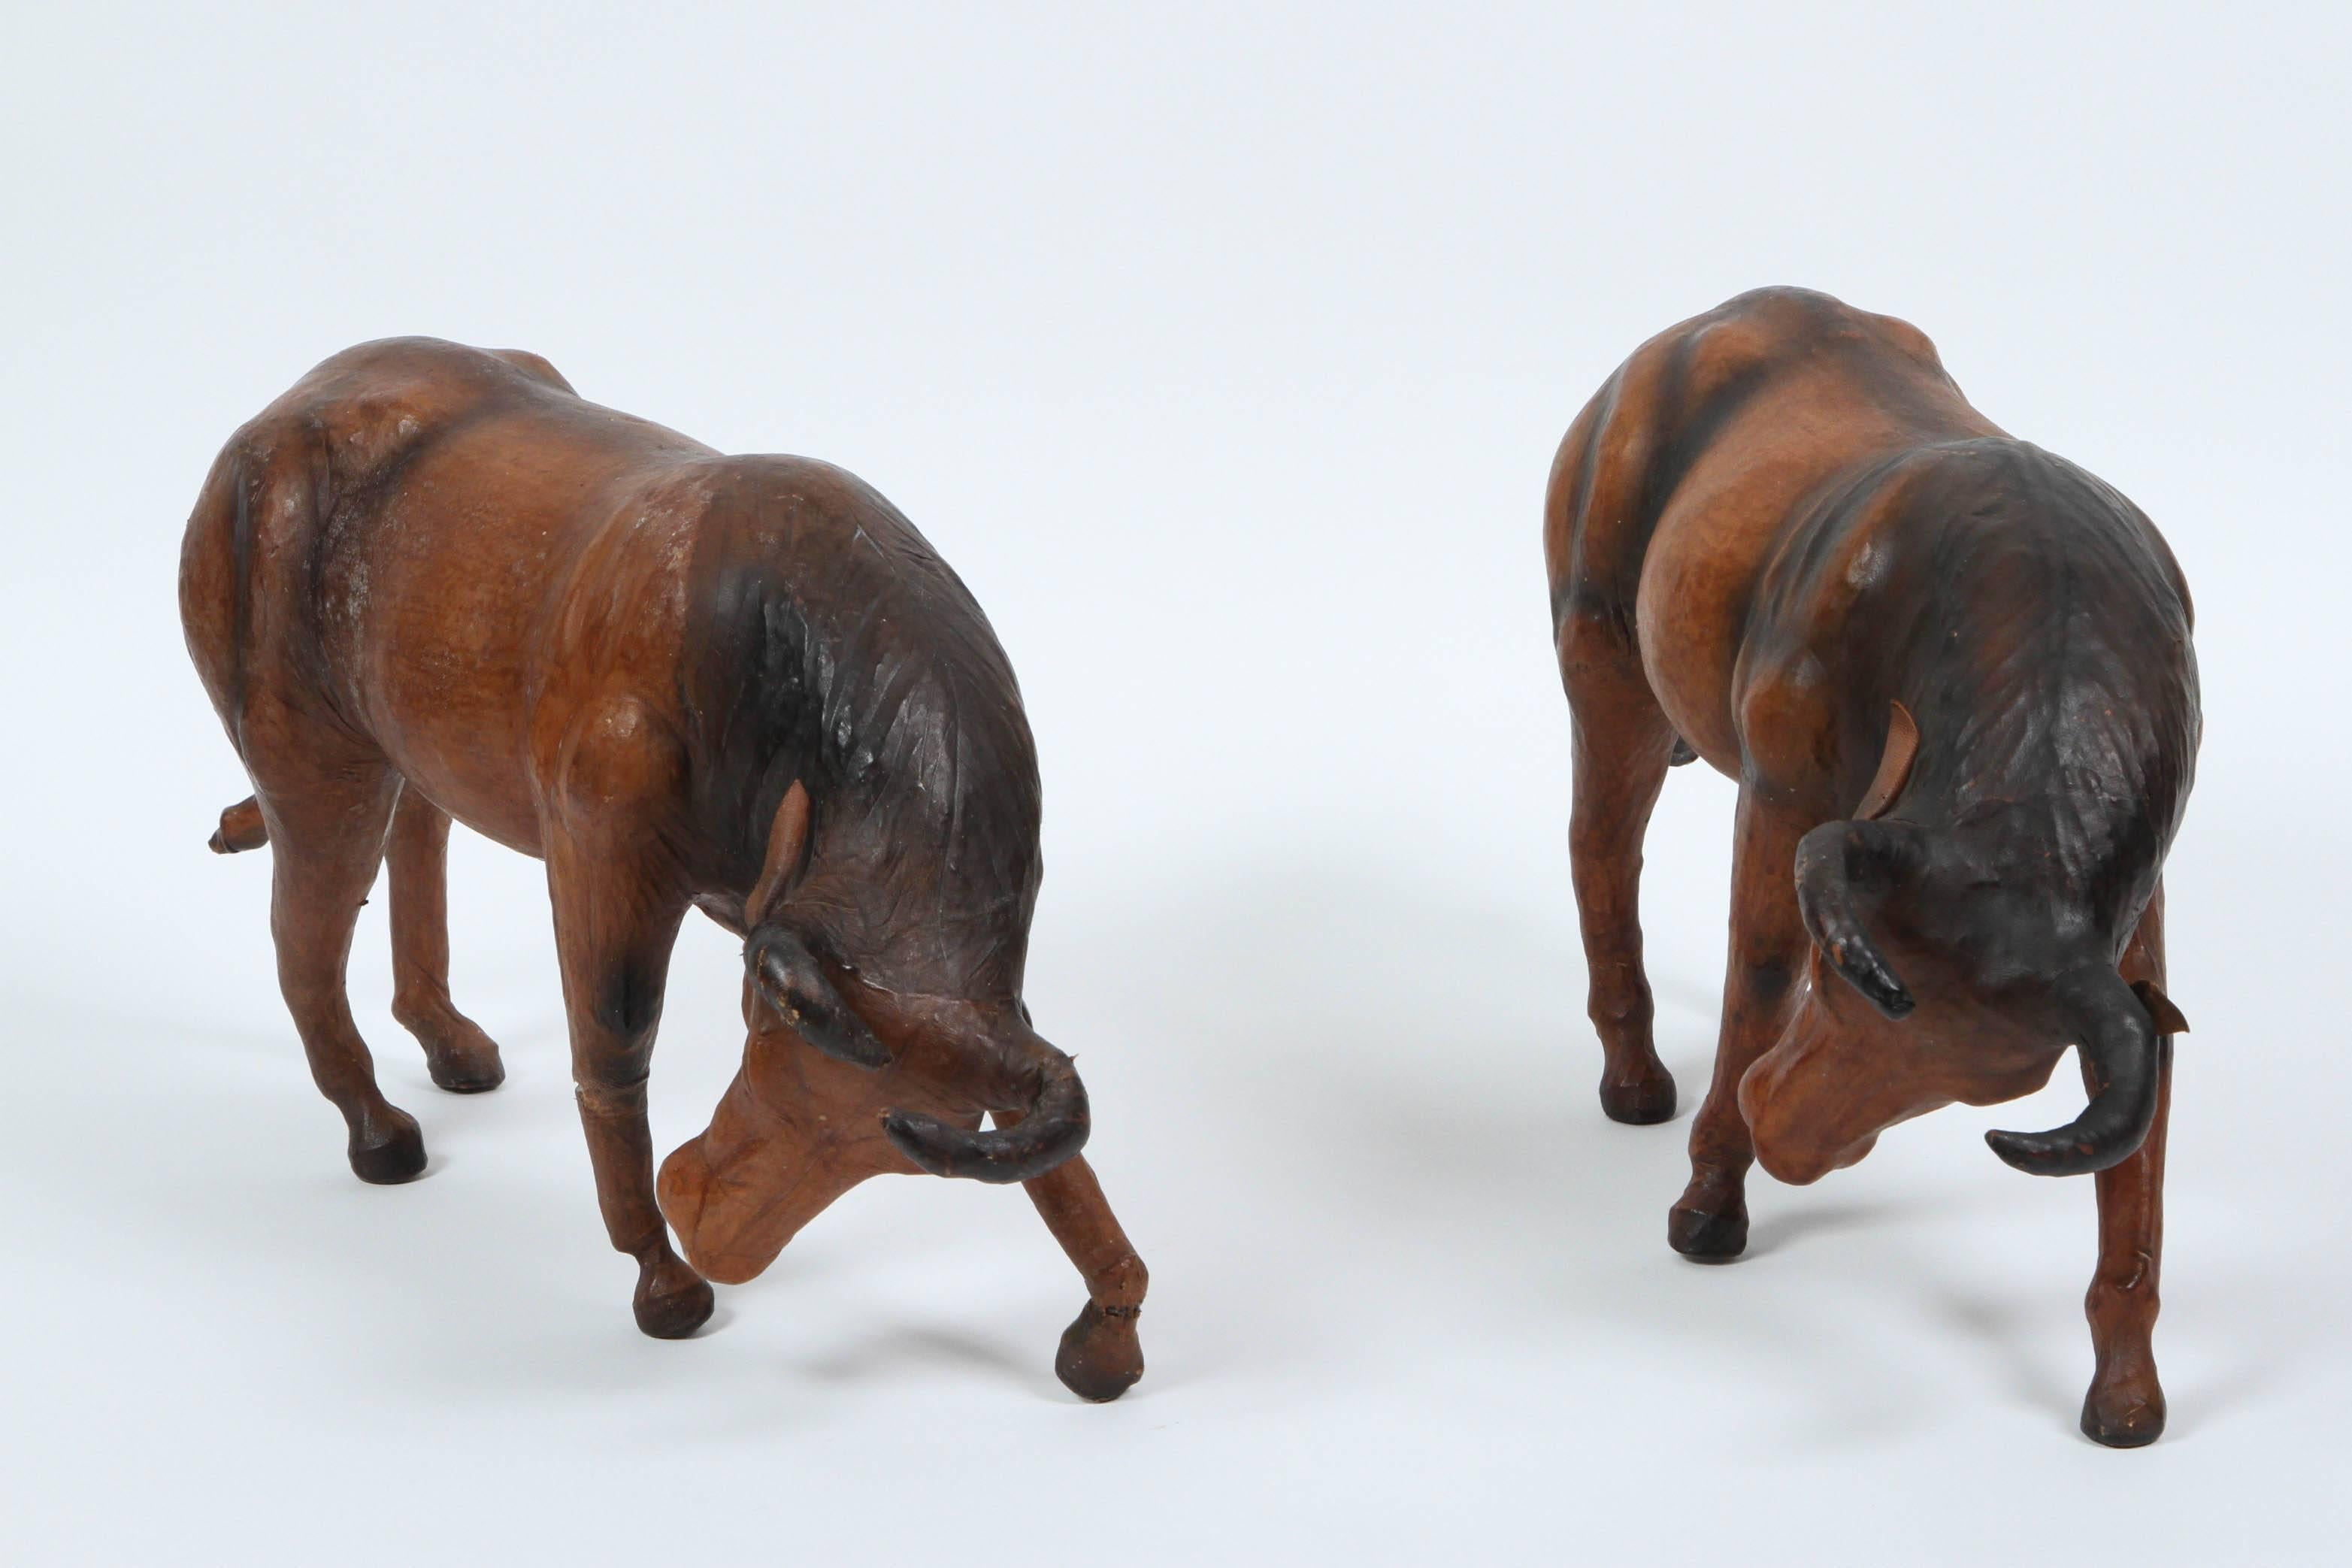 Pair of vintage leather wrapped fighting bulls in dark brown and black.
Hand tooled leather wrapped Spanish bulls.
Great decorative leather animals sculpture covered in thin and richly tanned leather, having inset glass eyes
Wonderful aged patina to